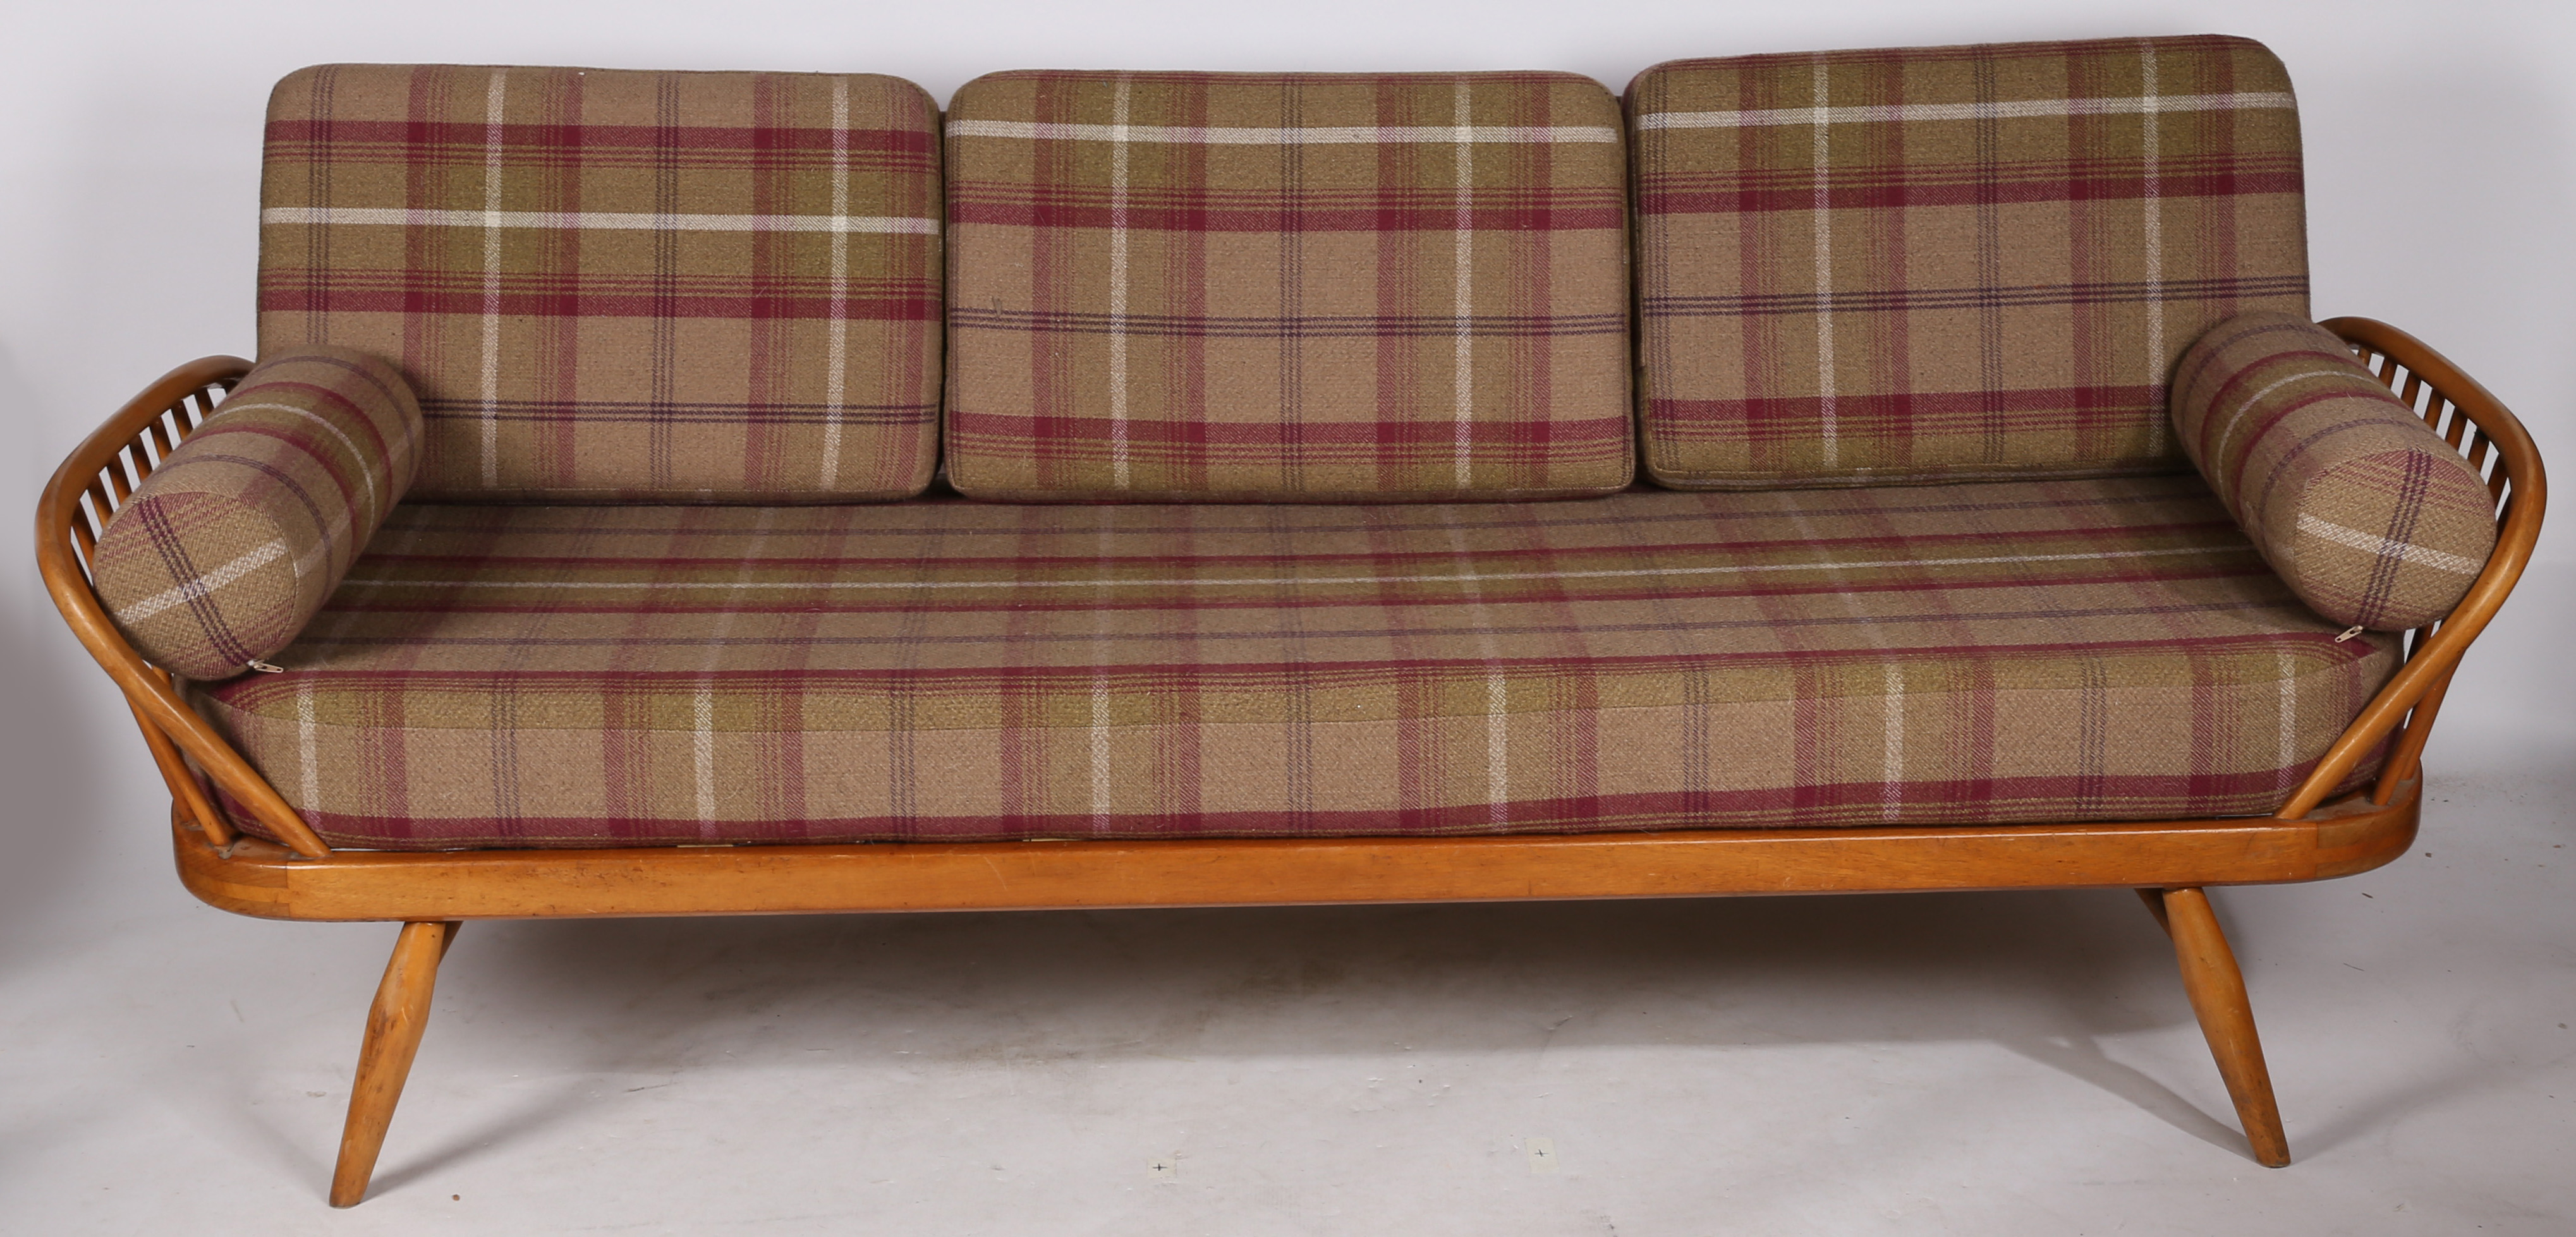 A mid 20th Century Ercol blonde day bed, 206cm x 75cm x 75cm.